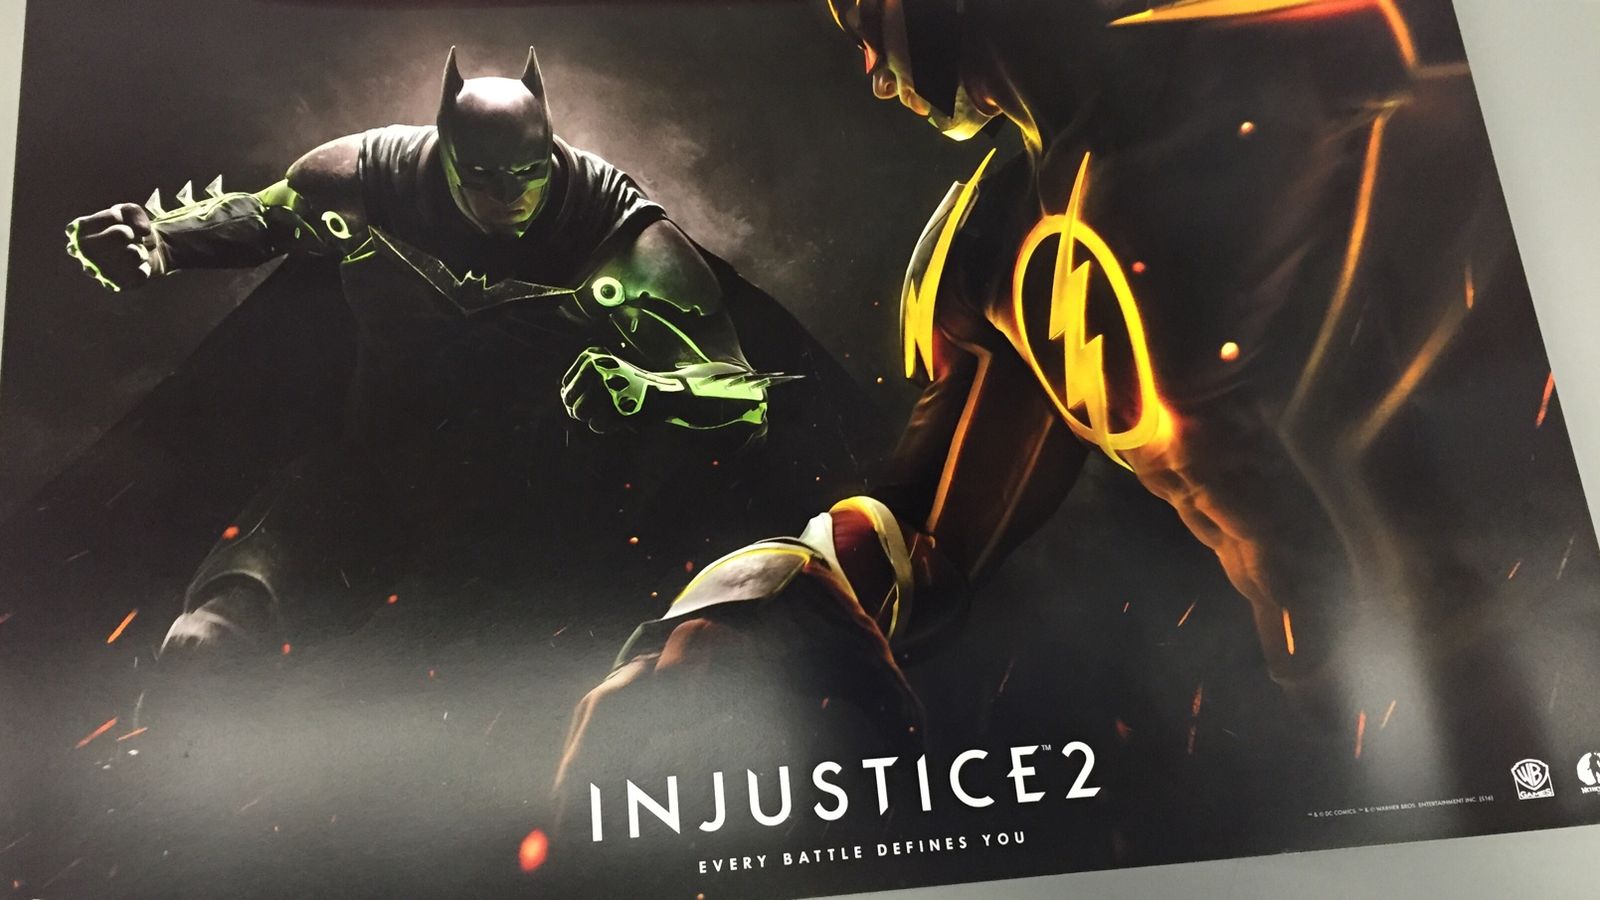 Just ahead of E3 2016 event this year, posters of the Injustice: Gods Among Us 2 have been leaked, confirming that this game is indeed in works and the gamers can expect it to be launched soon.